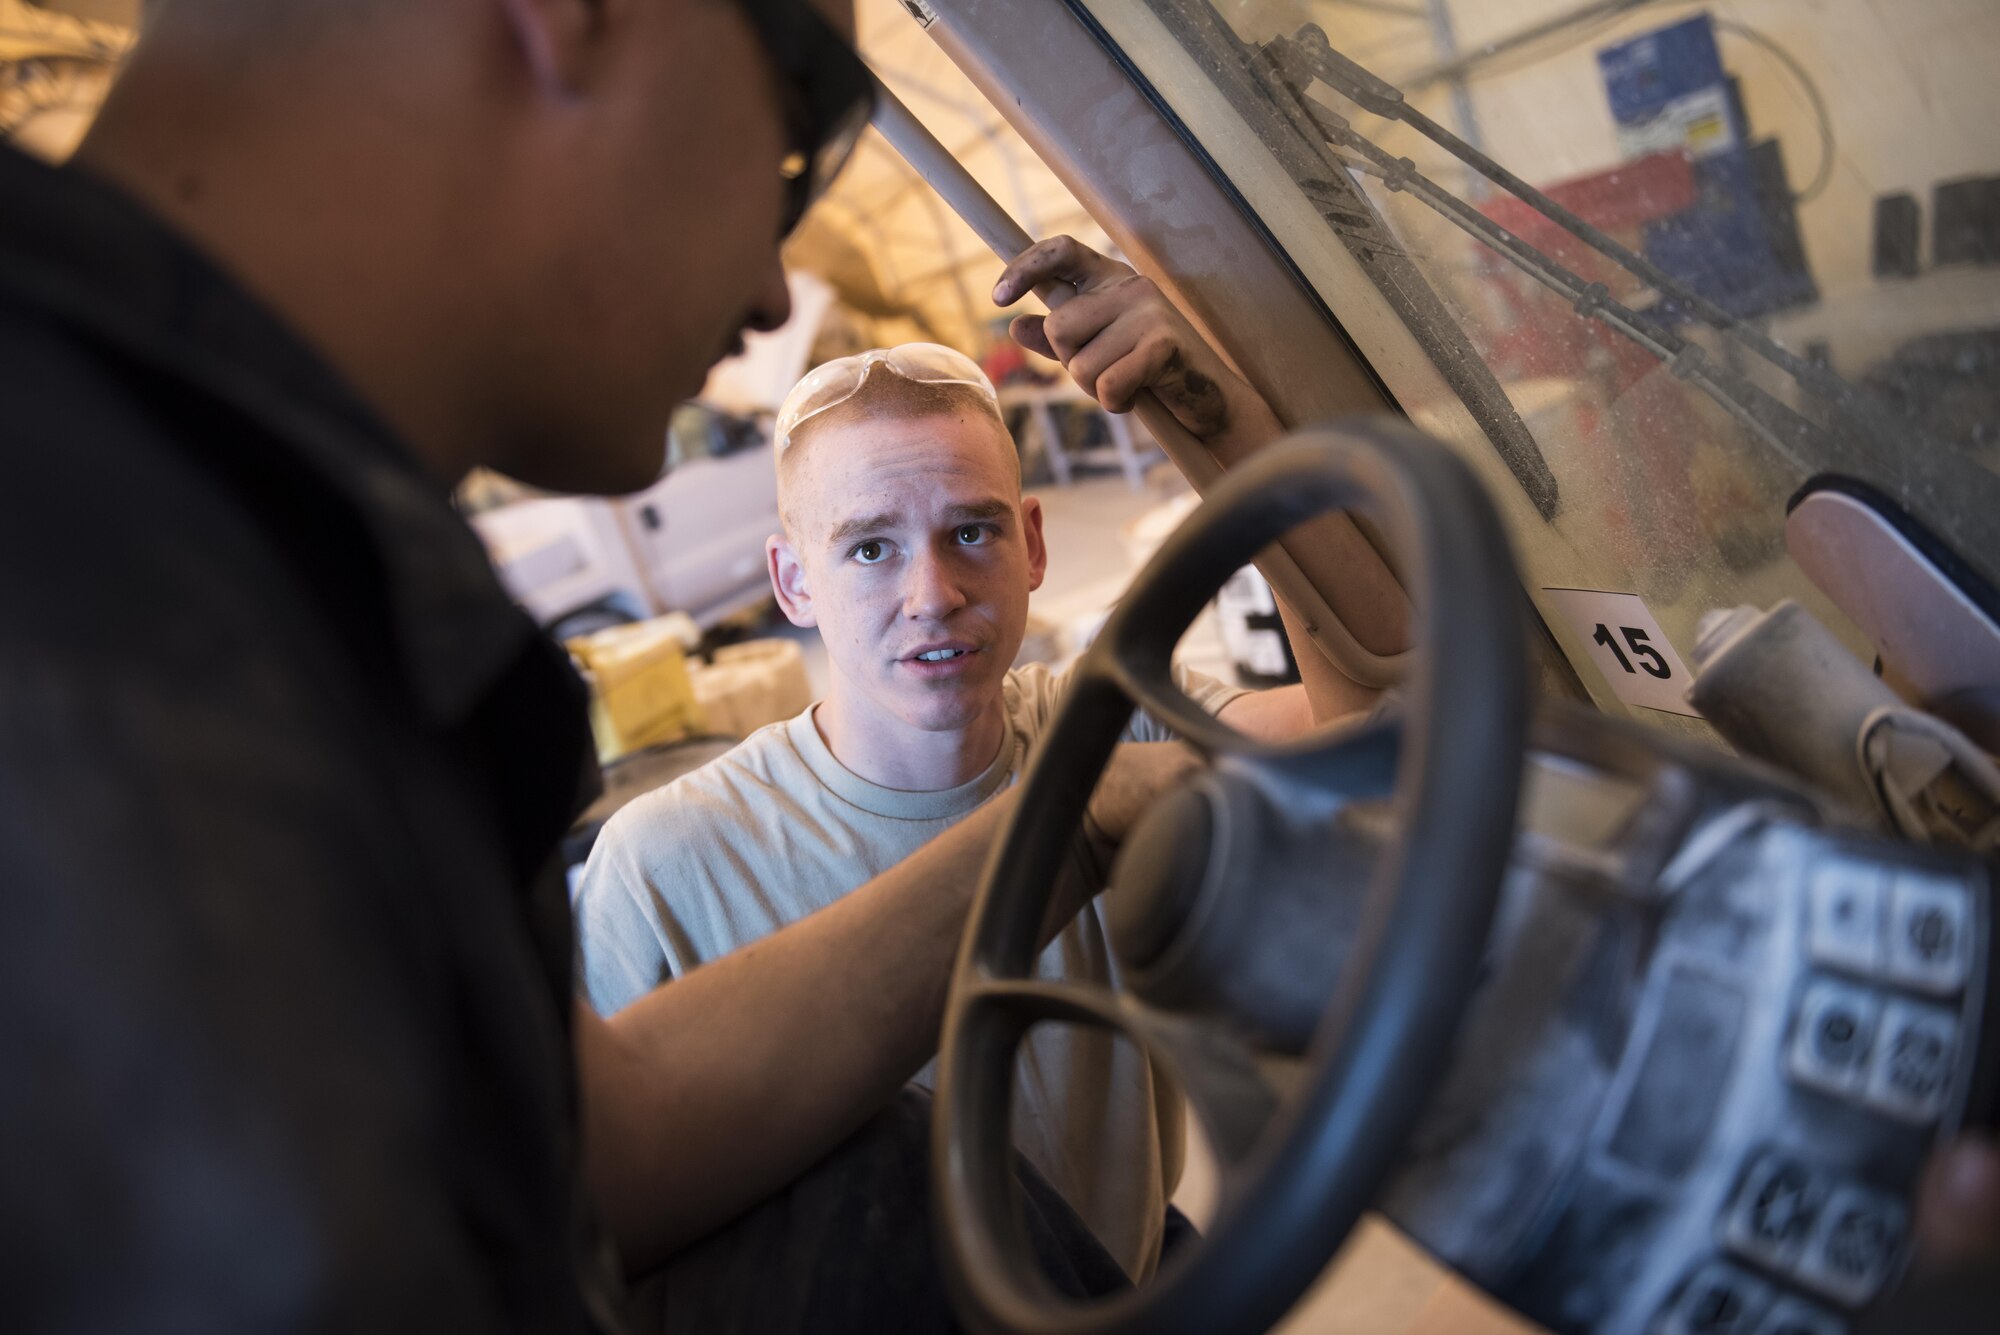 Vehicle maintainers assigned to the 332nd Expeditionary Logistics Readiness Squadron, diagnose an issue with the controls on a forklift, Sept. 14, 2017, in Southwest Asia. Tasked with maintaining a variety of unique and specialty vehicles, Airman mechanics must train continuously and pass along knowledge to ensure organizational competency. (U.S. Air Force photo by Senior Airman Joshua Kleinholz)